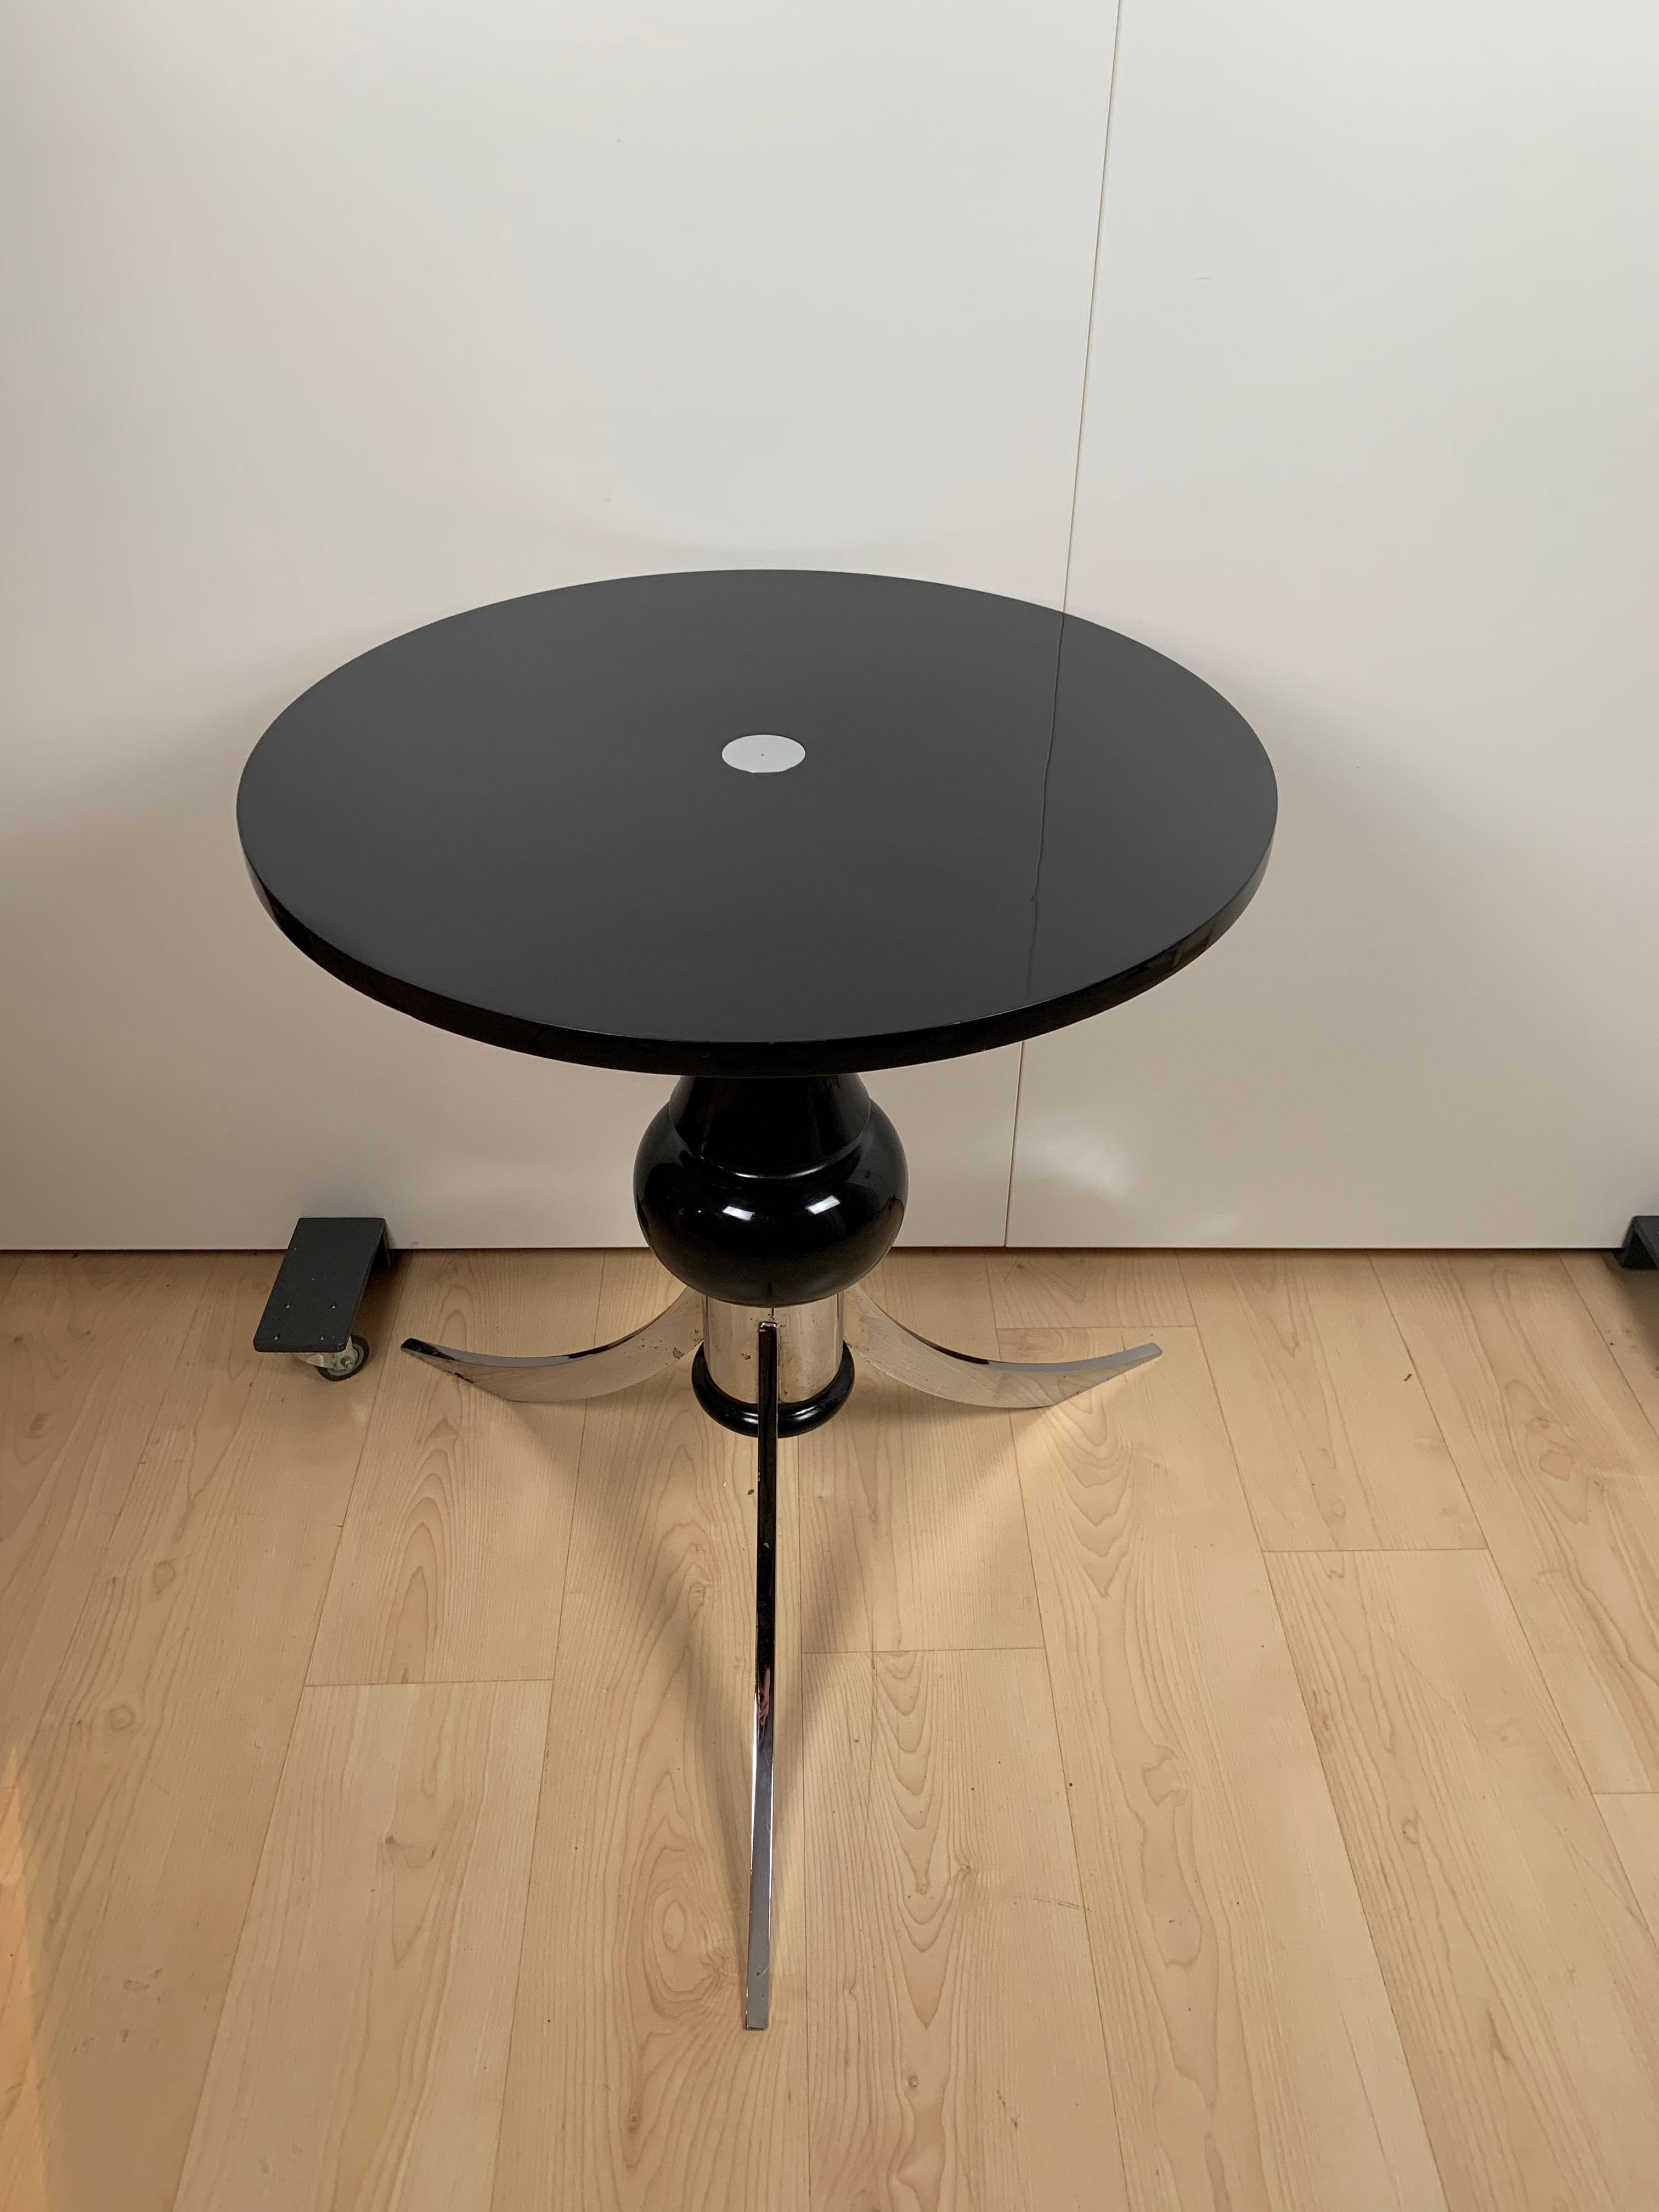 Extraordinary original Art Deco side or coffee table from France about 1930. Standing on three chrome-plated steel legs. Rotatable plate. Unusual shape similar to like a chess piece in its column. High-gloss black lacquered with original chrome